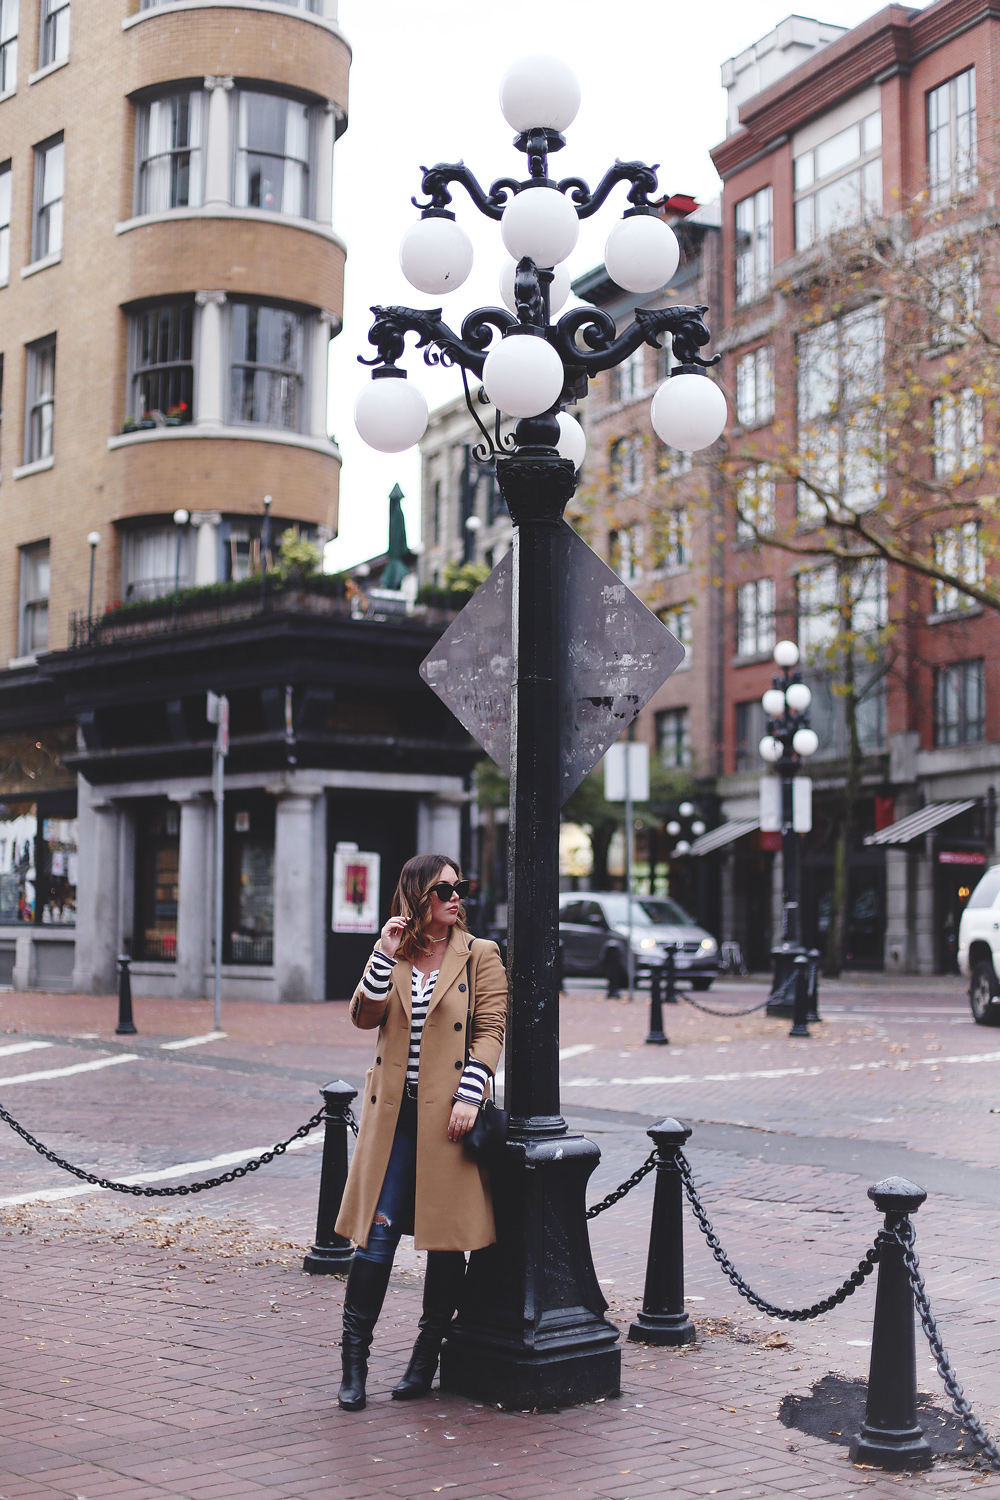 To Vogue or Bust shares camel coat outfit ideas in a camel Aritzia wilfred coat, Mavi skinny jeans, striped Gentle Fawn top, La Canadienne boots and Celine sunglasses in Gastown, Vancouver